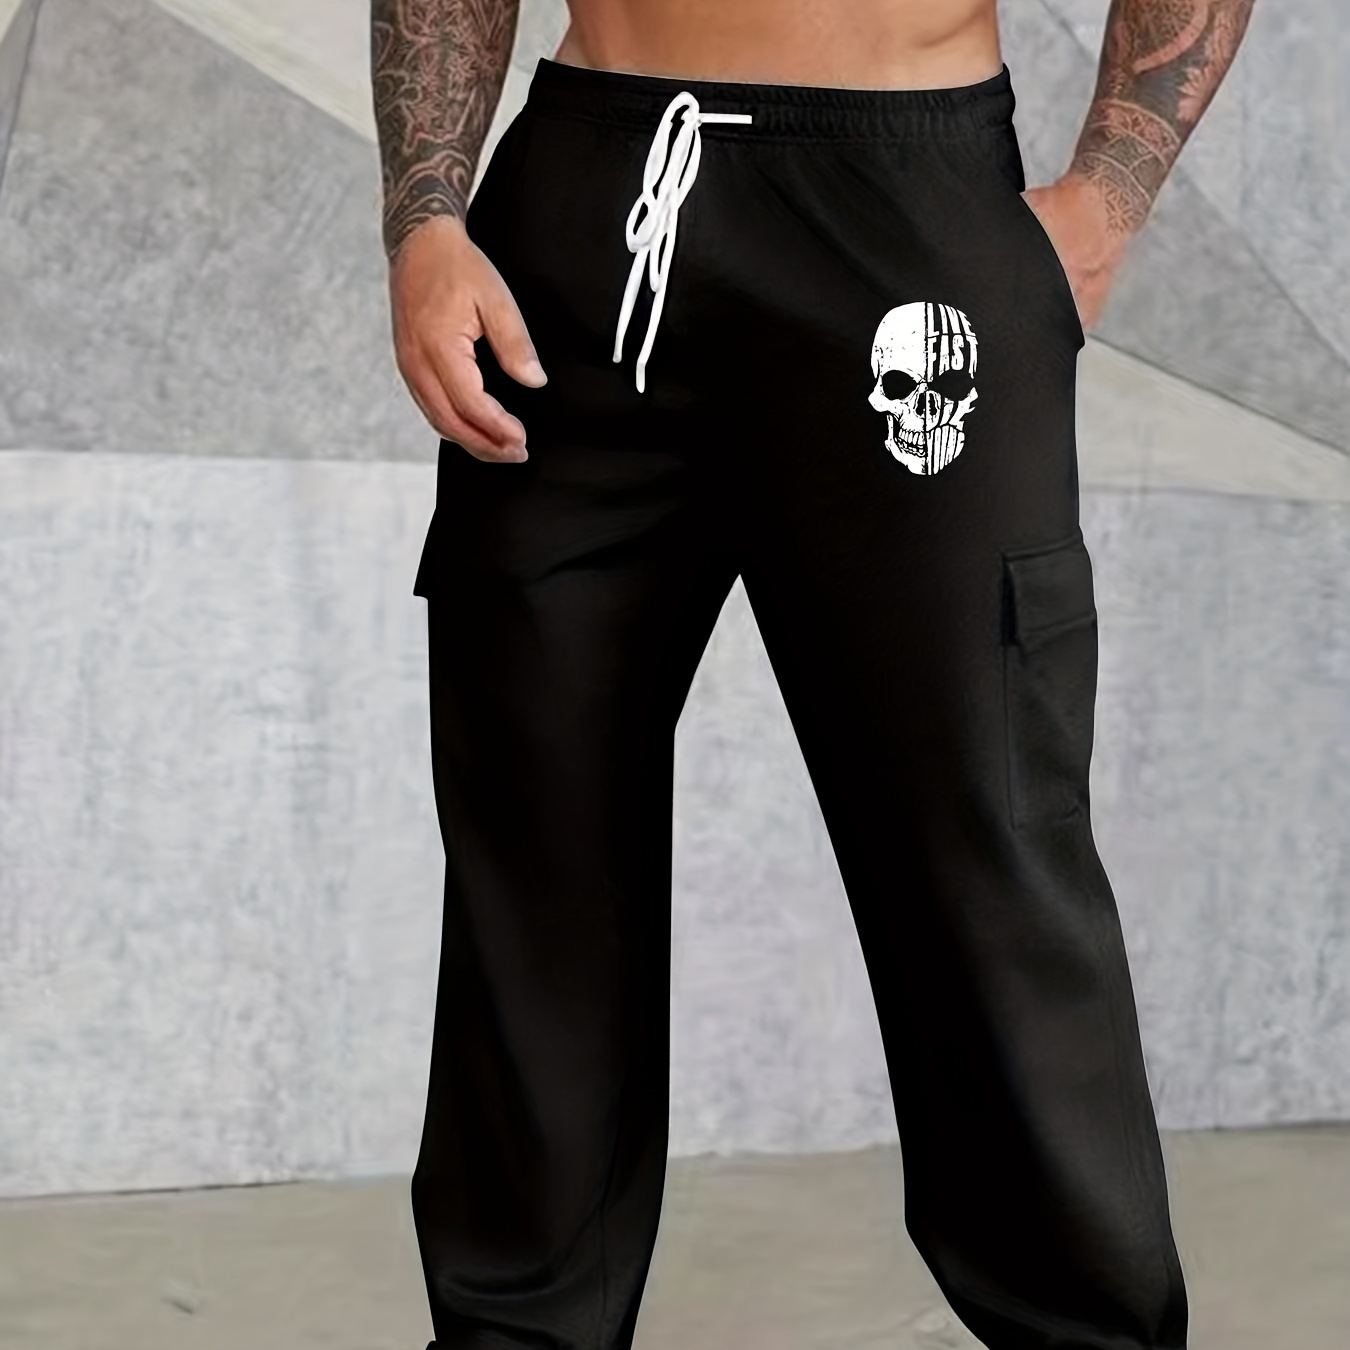 

Men's Skull/heart Graphic Print Fleece Pants For Workout/sports, Causal Trendy Oversized Pants For Cool Males, Plus Size